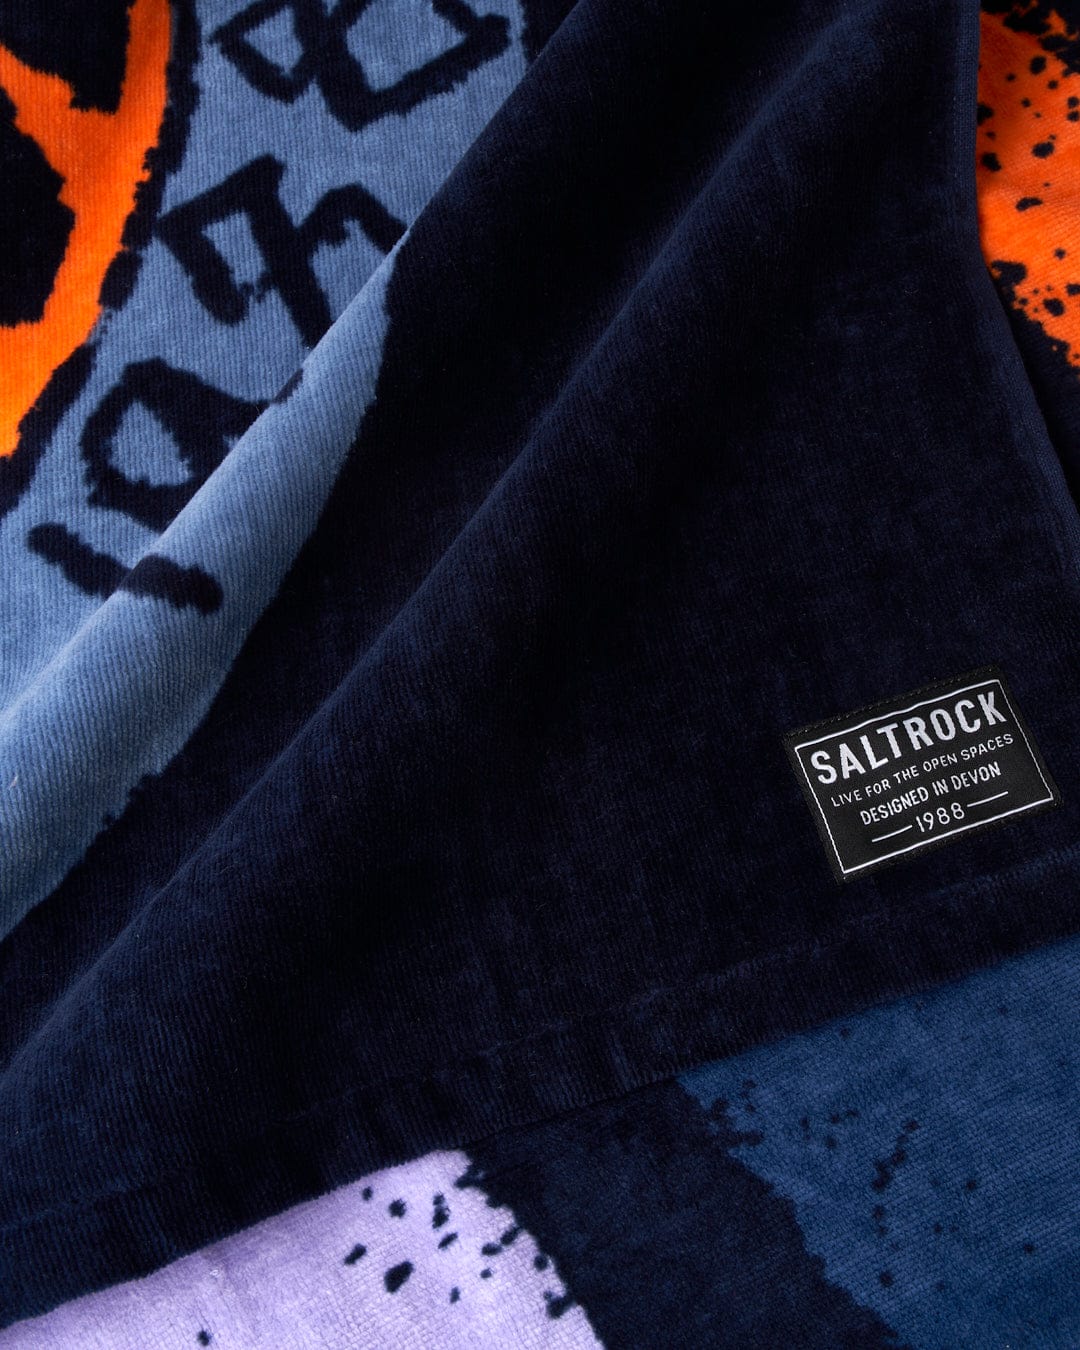 Close-up of a Saltrock SR Original - Towel - Blue clothing label on a dark fabric background with partial view of a soft towelling patterned garment.